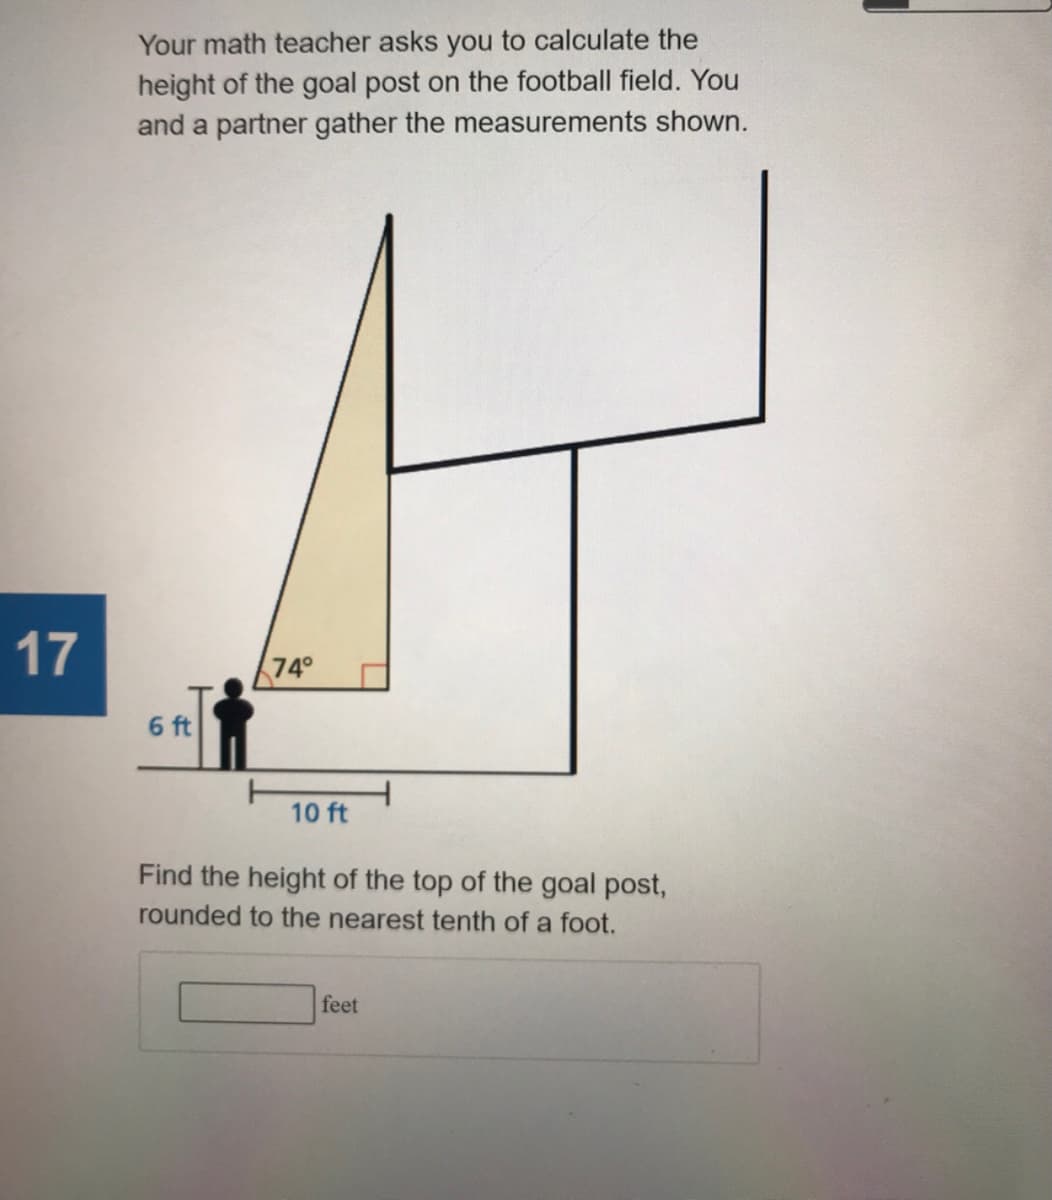 Your math teacher asks you to calculate the
height of the goal post on the football field. You
and a partner gather the measurements shown.
17
74°
6 ft
10 ft
Find the height of the top of the goal post,
rounded to the nearest tenth of a foot.
feet
